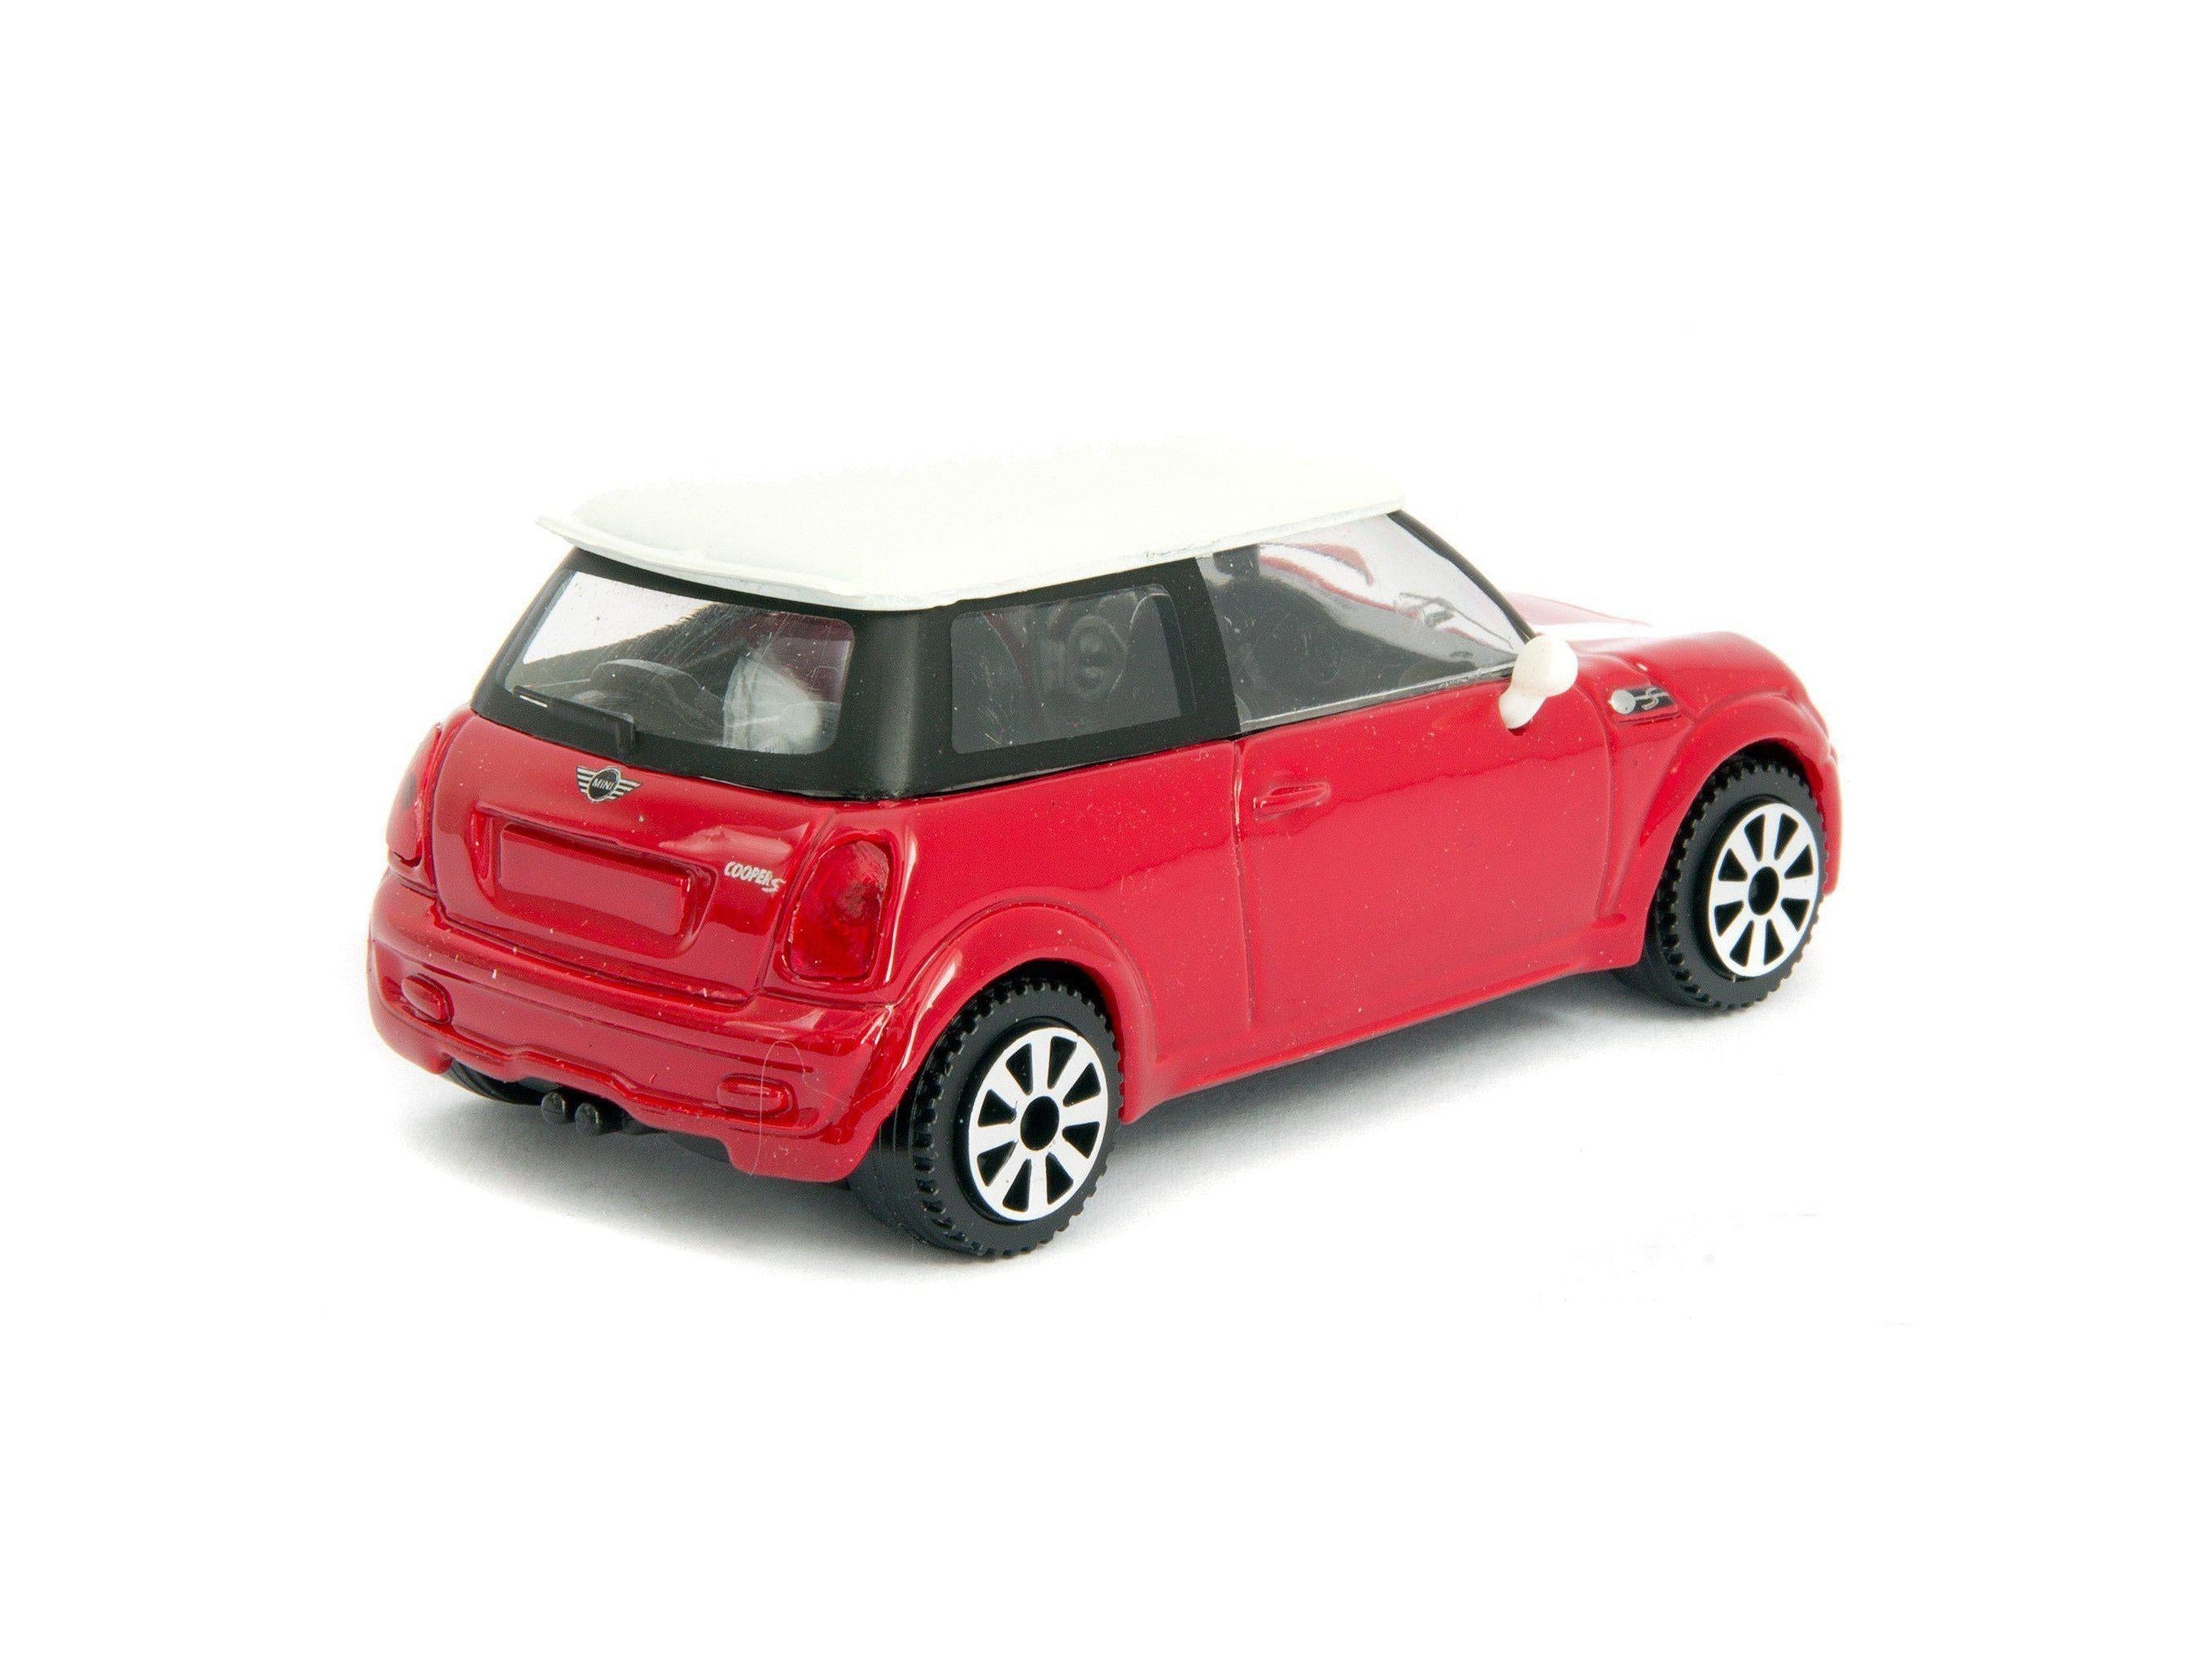 https://diecastmodelcentre.co.uk/cdn/shop/products/mini-cooper-s-diecast-toy-car-red-143-scale-bburago-2.jpg?v=1695304712&width=2730